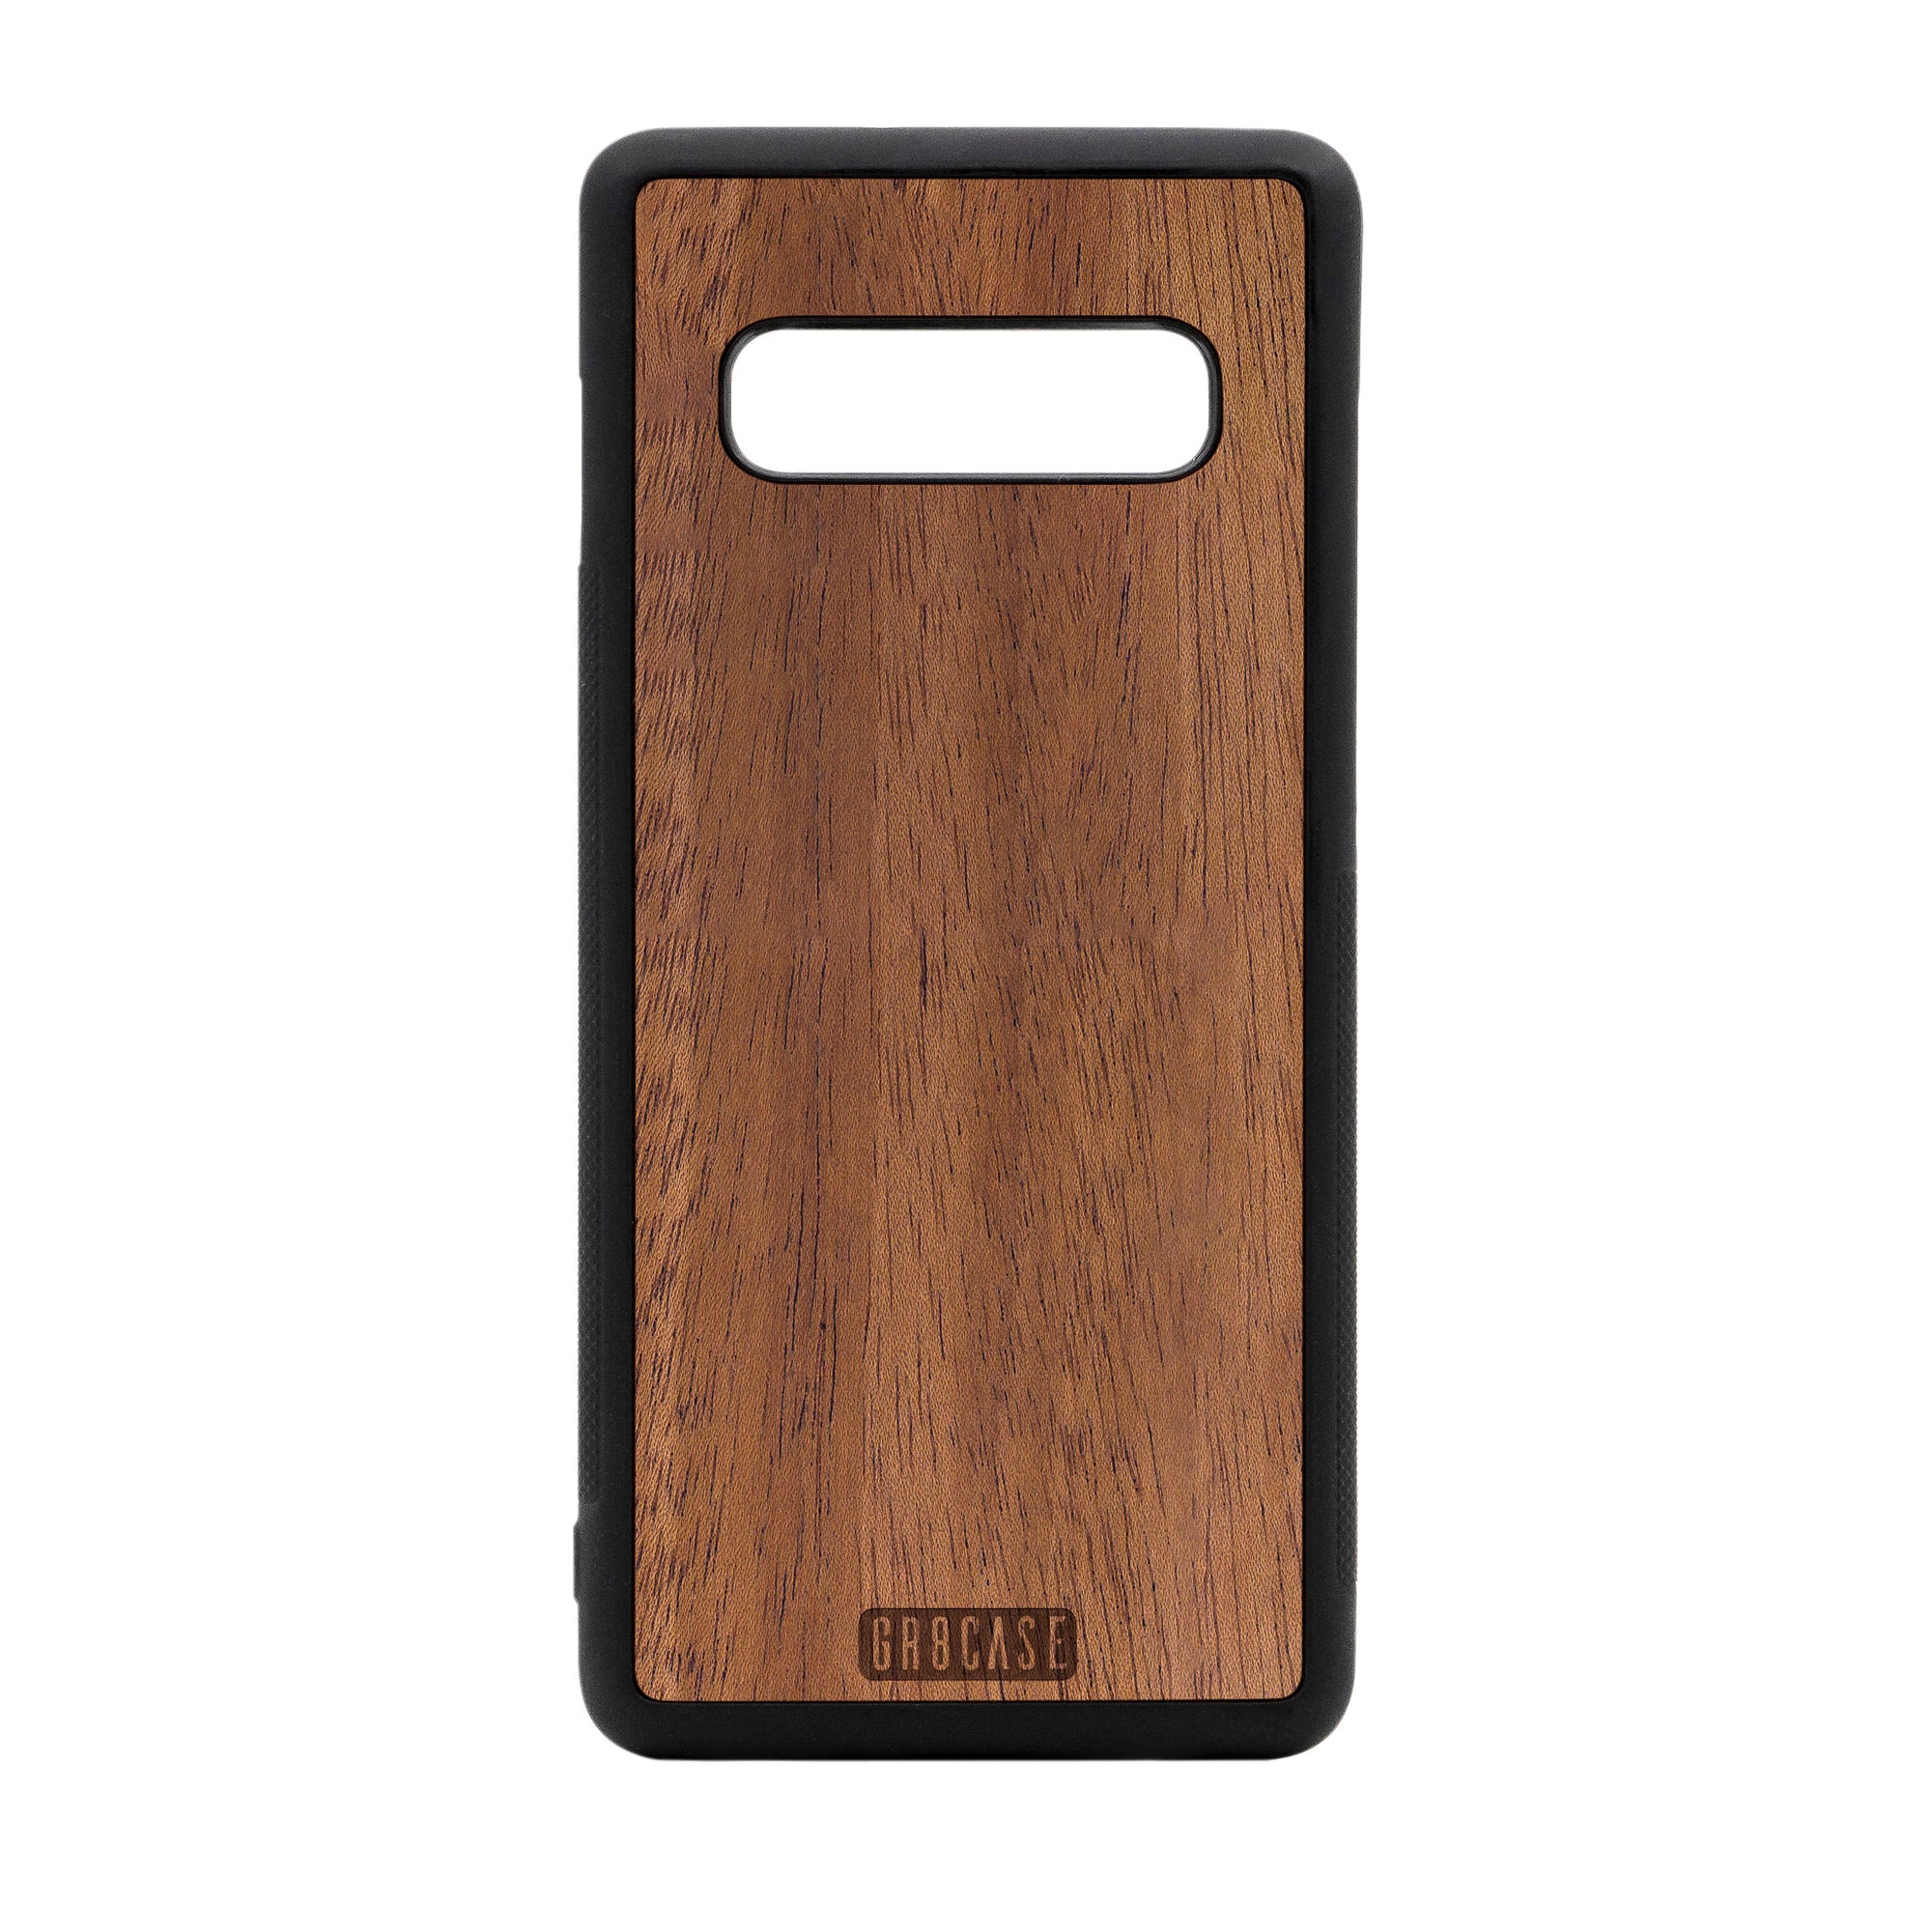 Classic Solid Wood Panel Inlay Case For Samsung Galaxy S10 Plus by GR8CASE